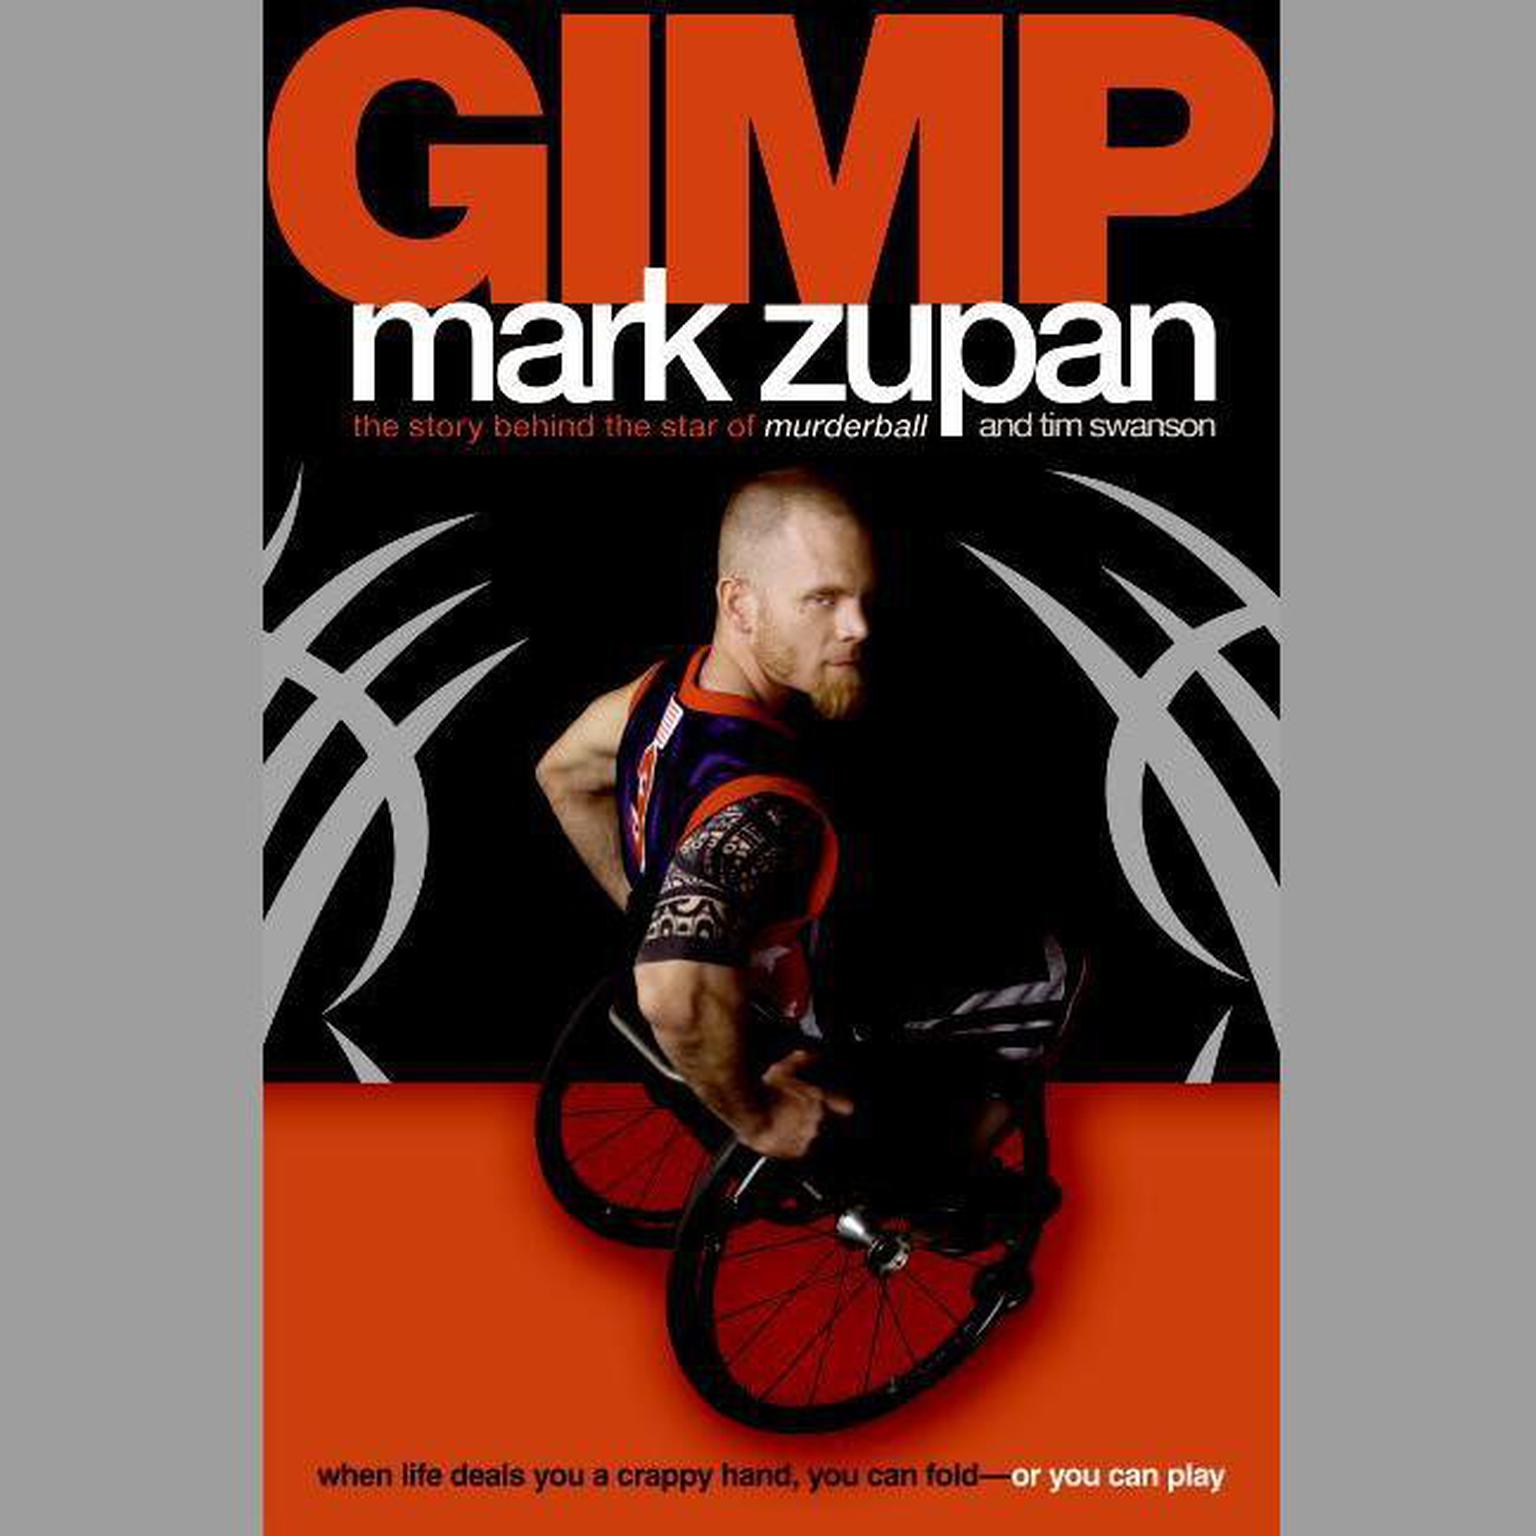 GIMP (Abridged): When Life Deals You a Crappy Hand, You Can Fold---or You Can Play Audiobook, by Mark Zupan